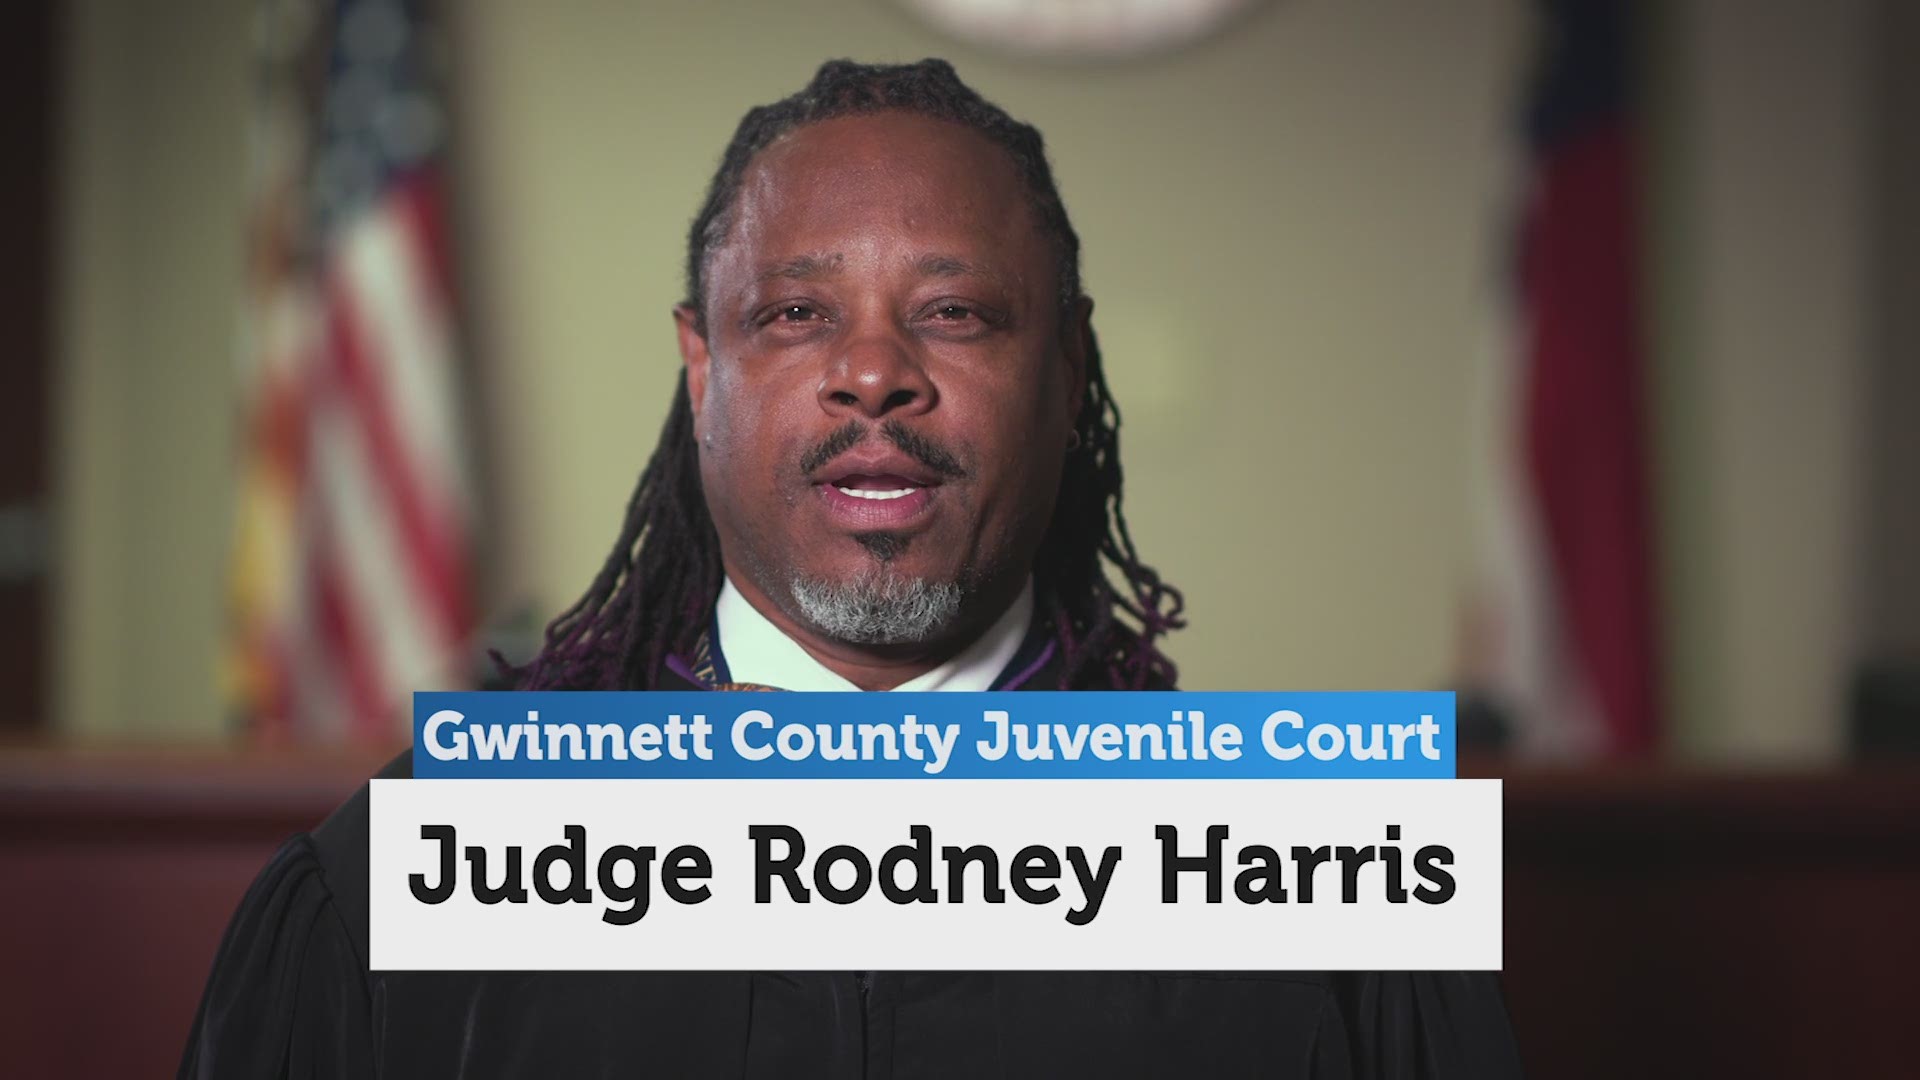 Gwinnett County Police Department, in partnership with the District Attorney’s Office, Solicitor’s Office, and Sheriff’s Office release informational video.